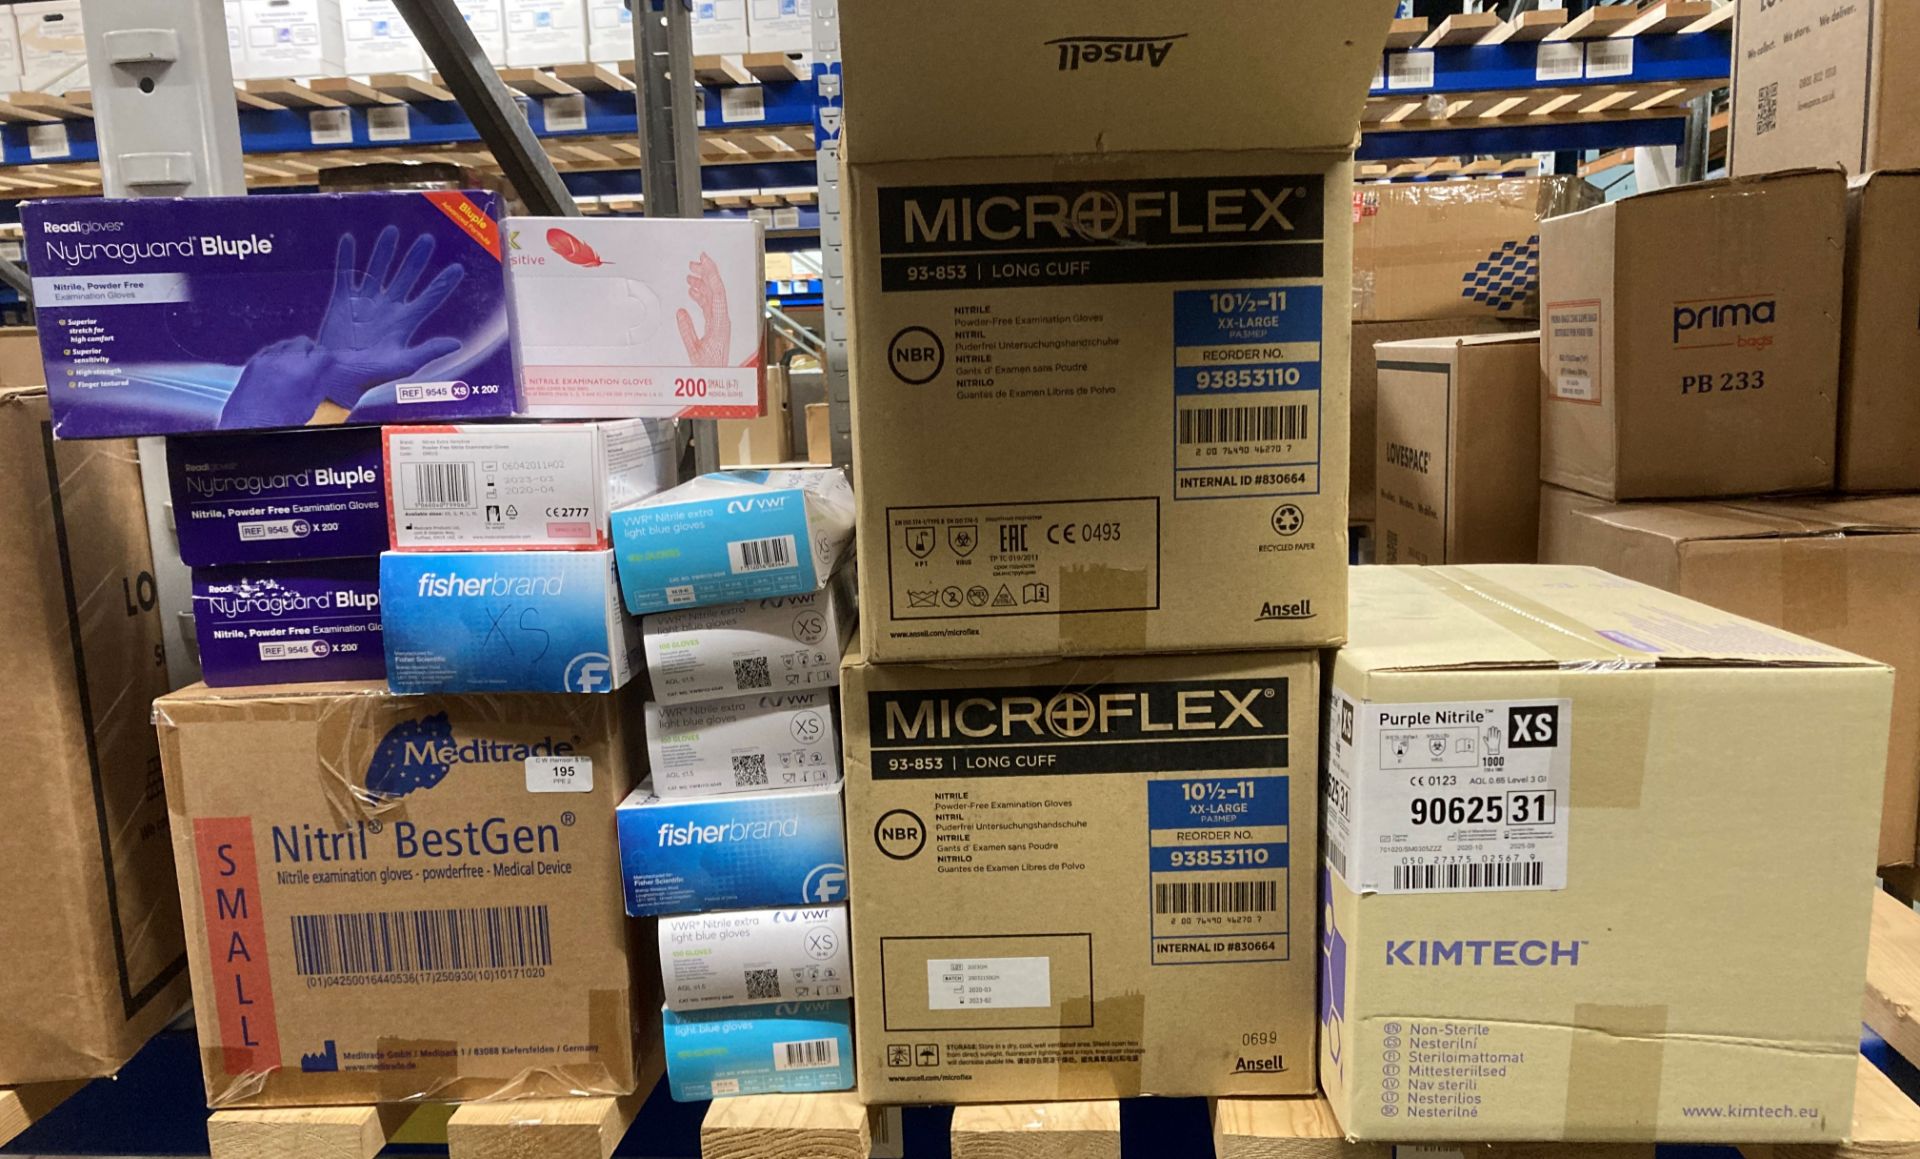 50 boxes of assorted Nitrile and others assorted gloves by Kimtech, Microflex etc assorted sizes XS,